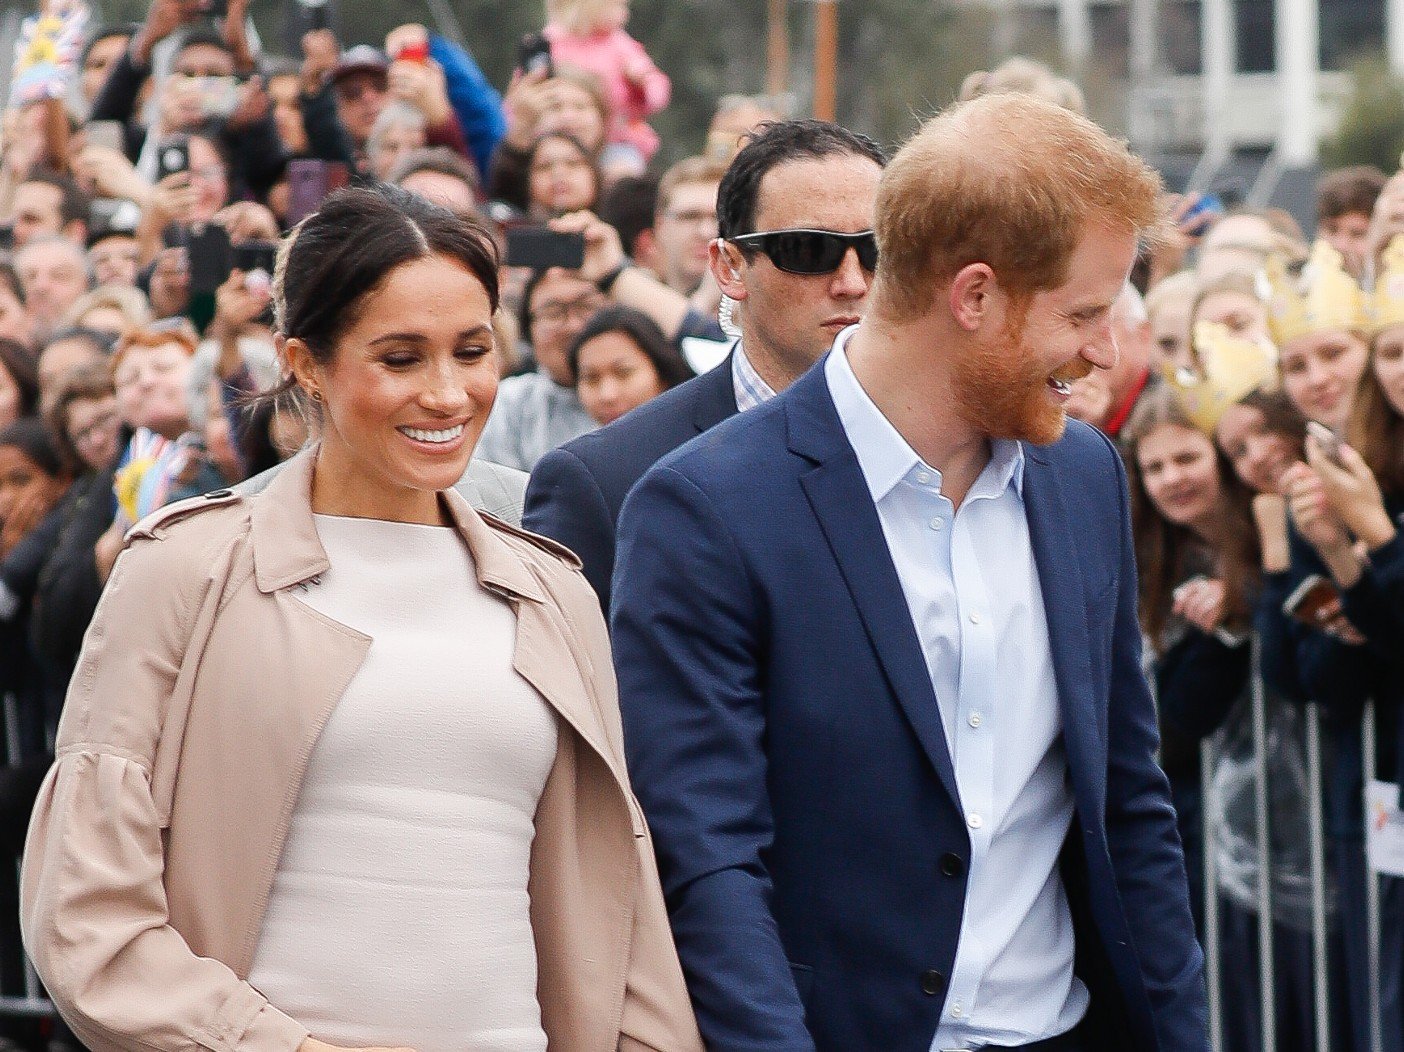 New Biography: Prince Harry’s Friends Call Him ‘Nuts,’ To Date Meghan Markle